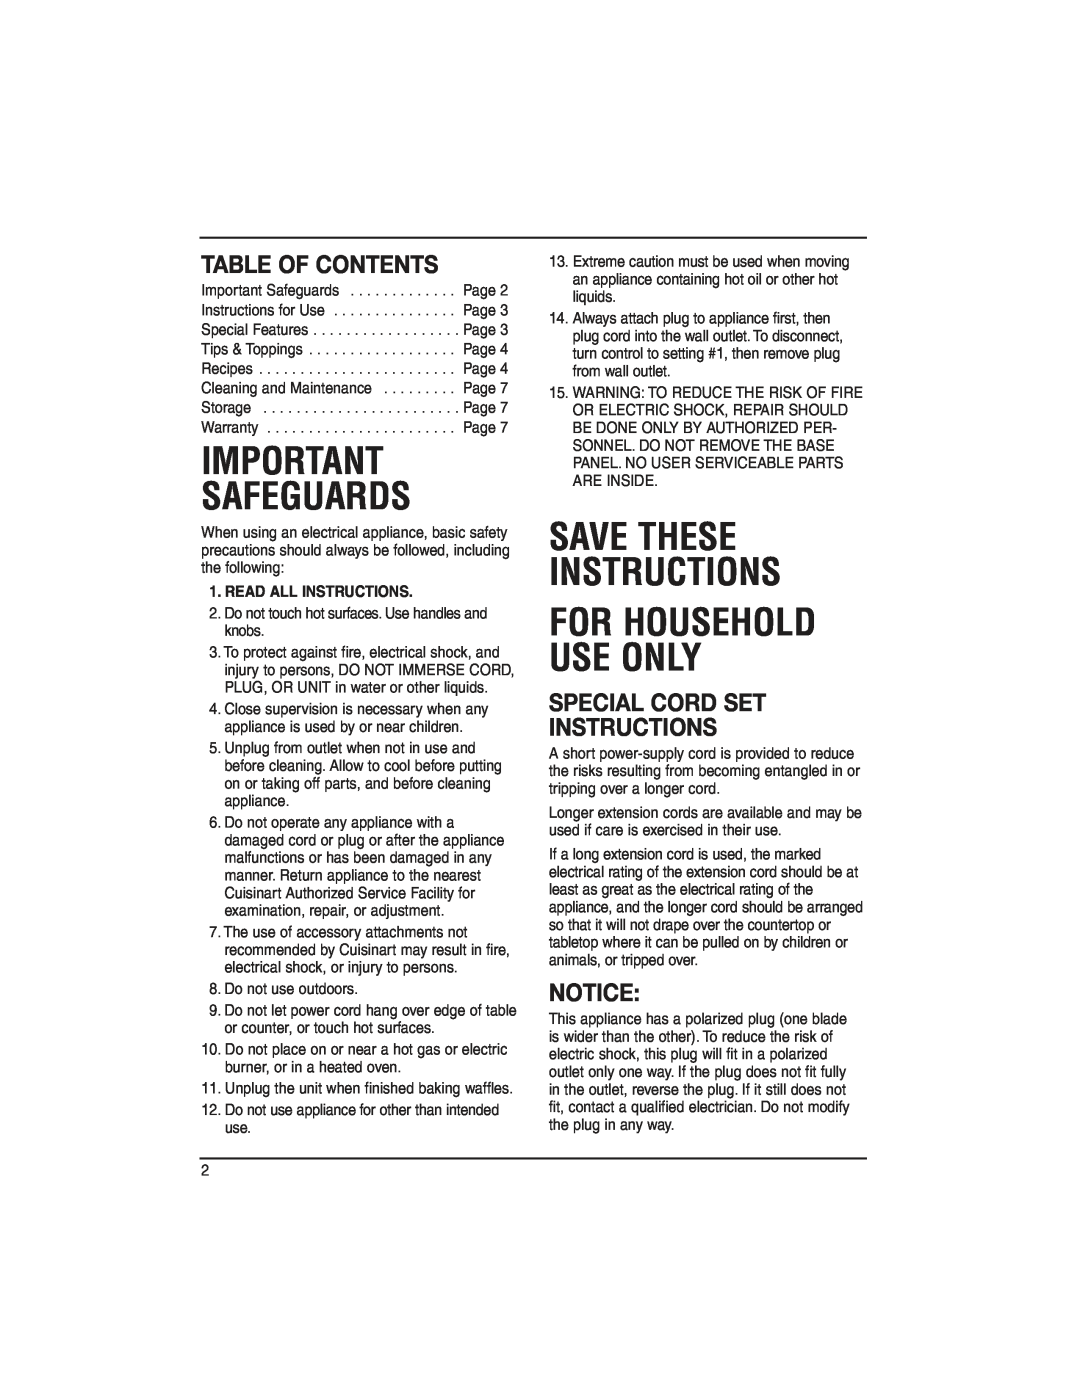 Cuisinart WMB-2A manual Table Of Contents, Special Cord Set Instructions, Safeguards, Save These Instructions 